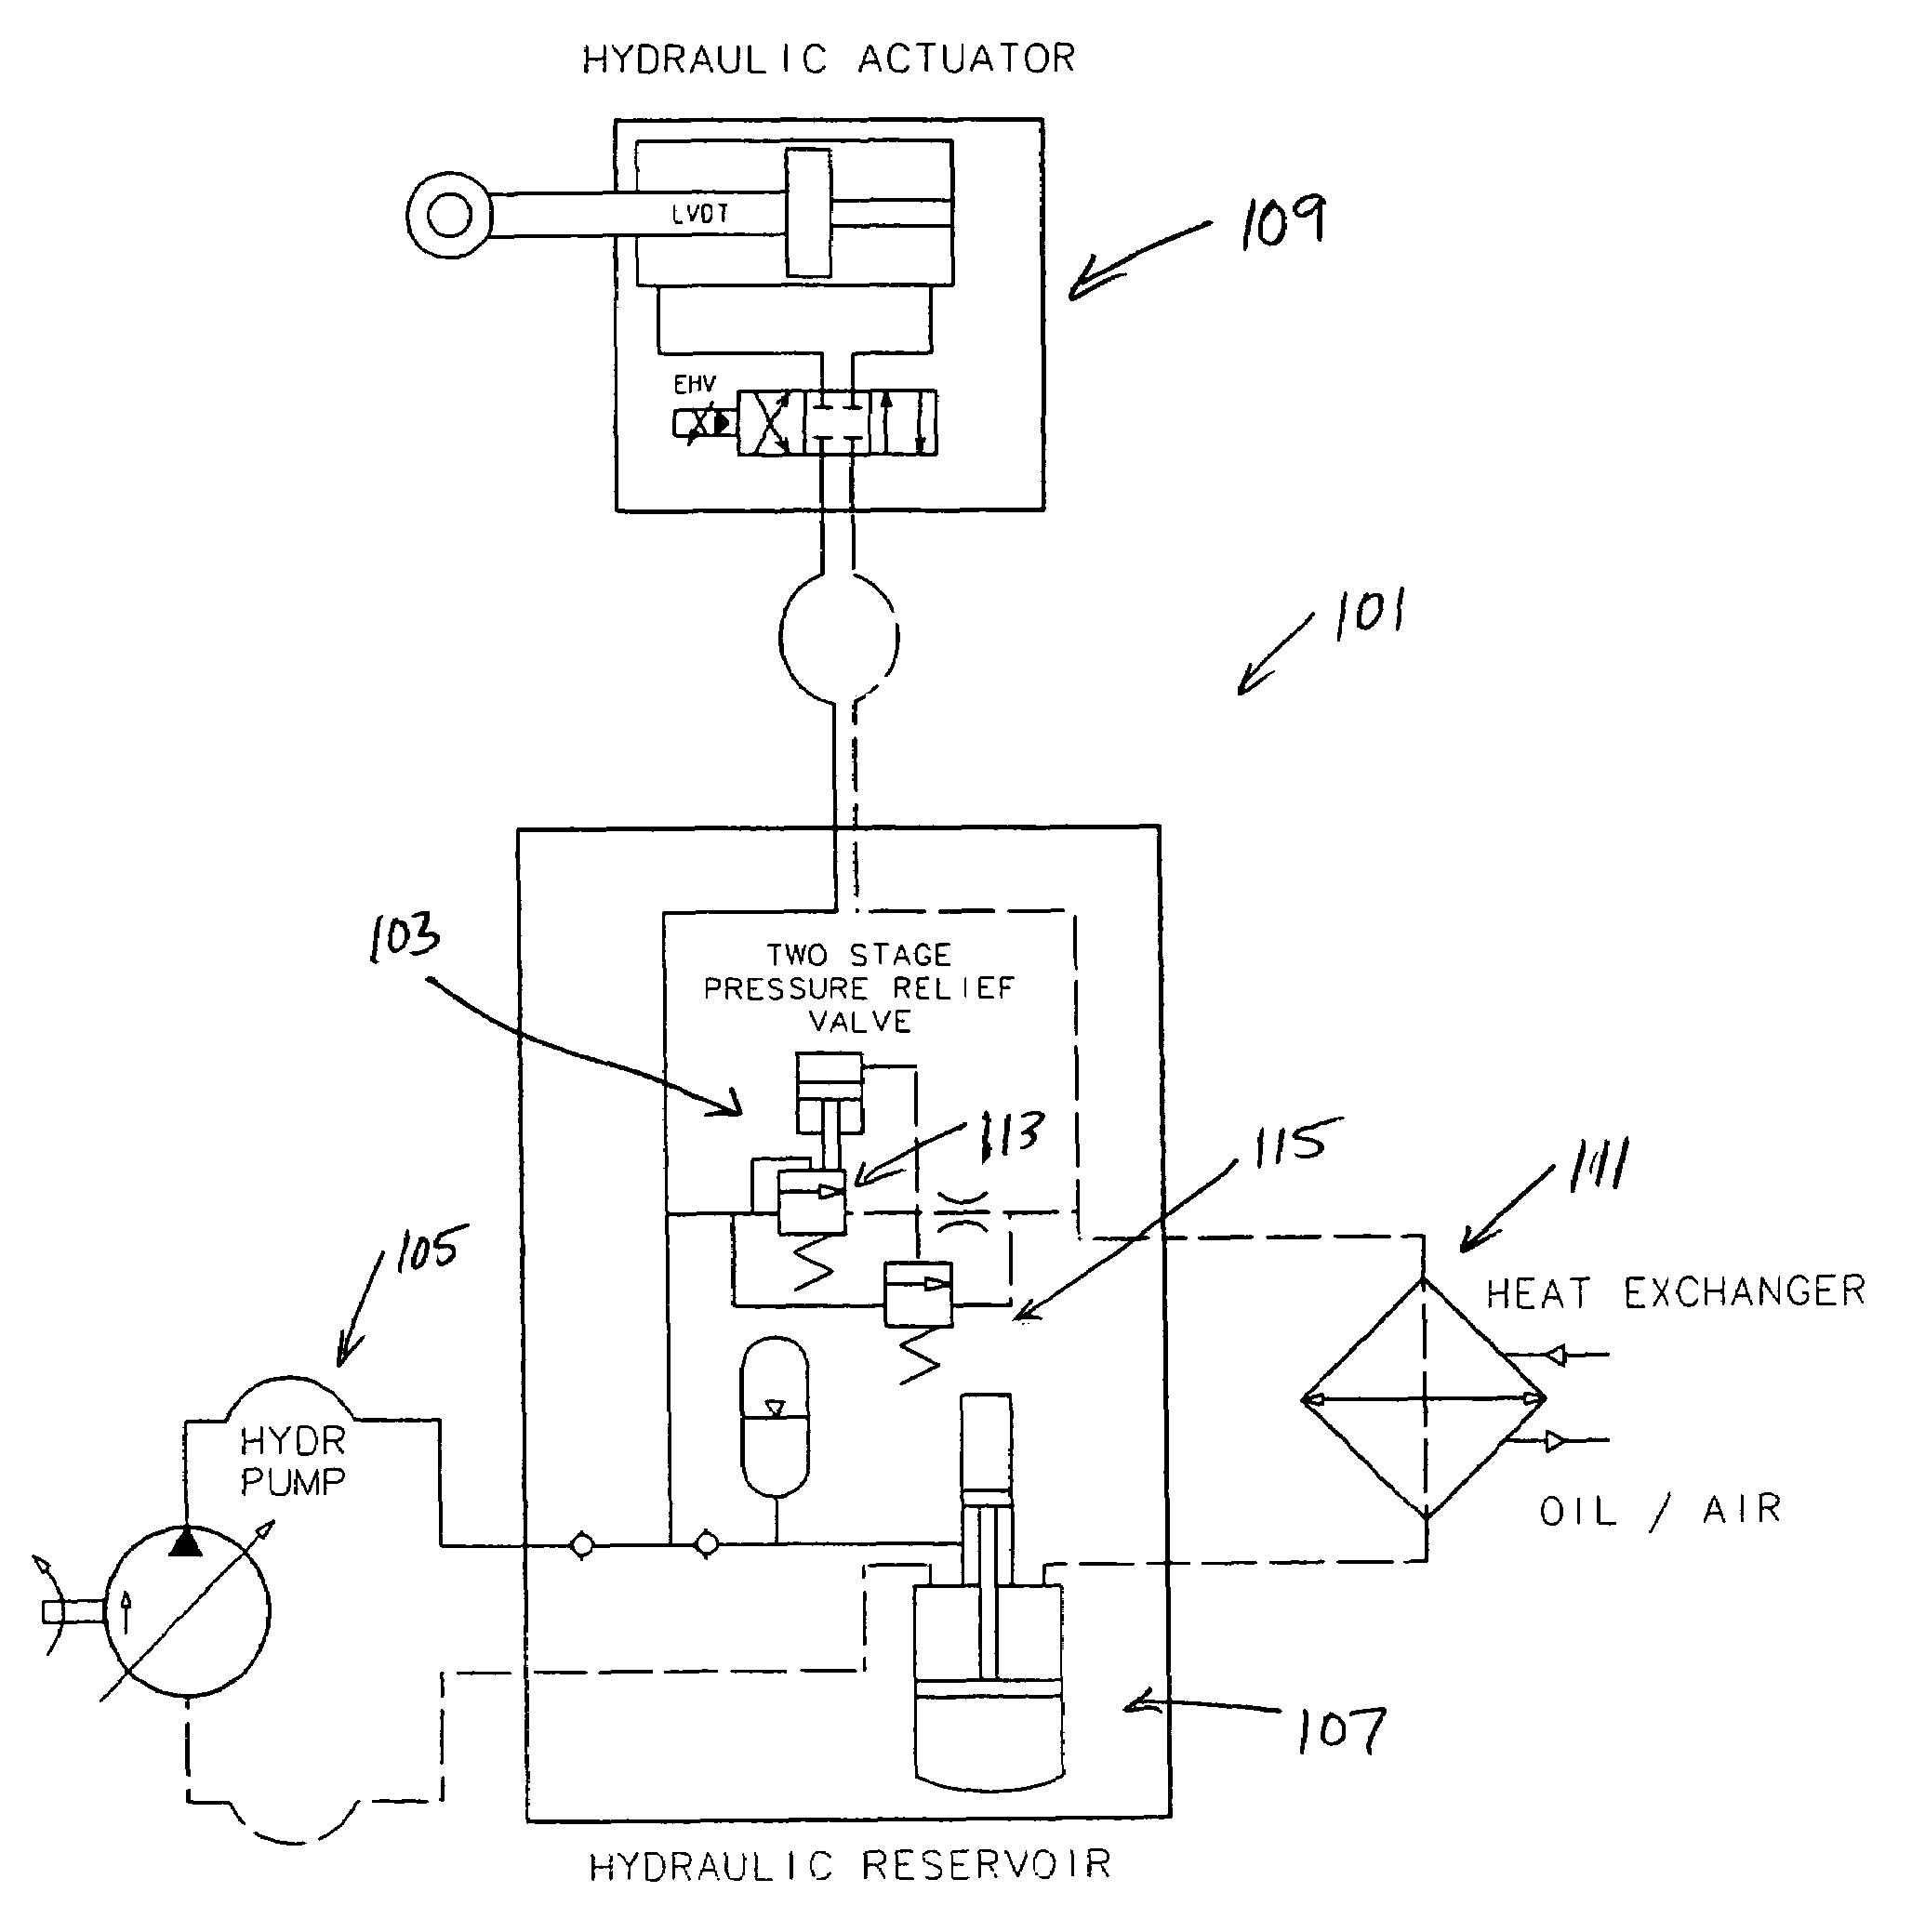 Two-stage pressure relief valve